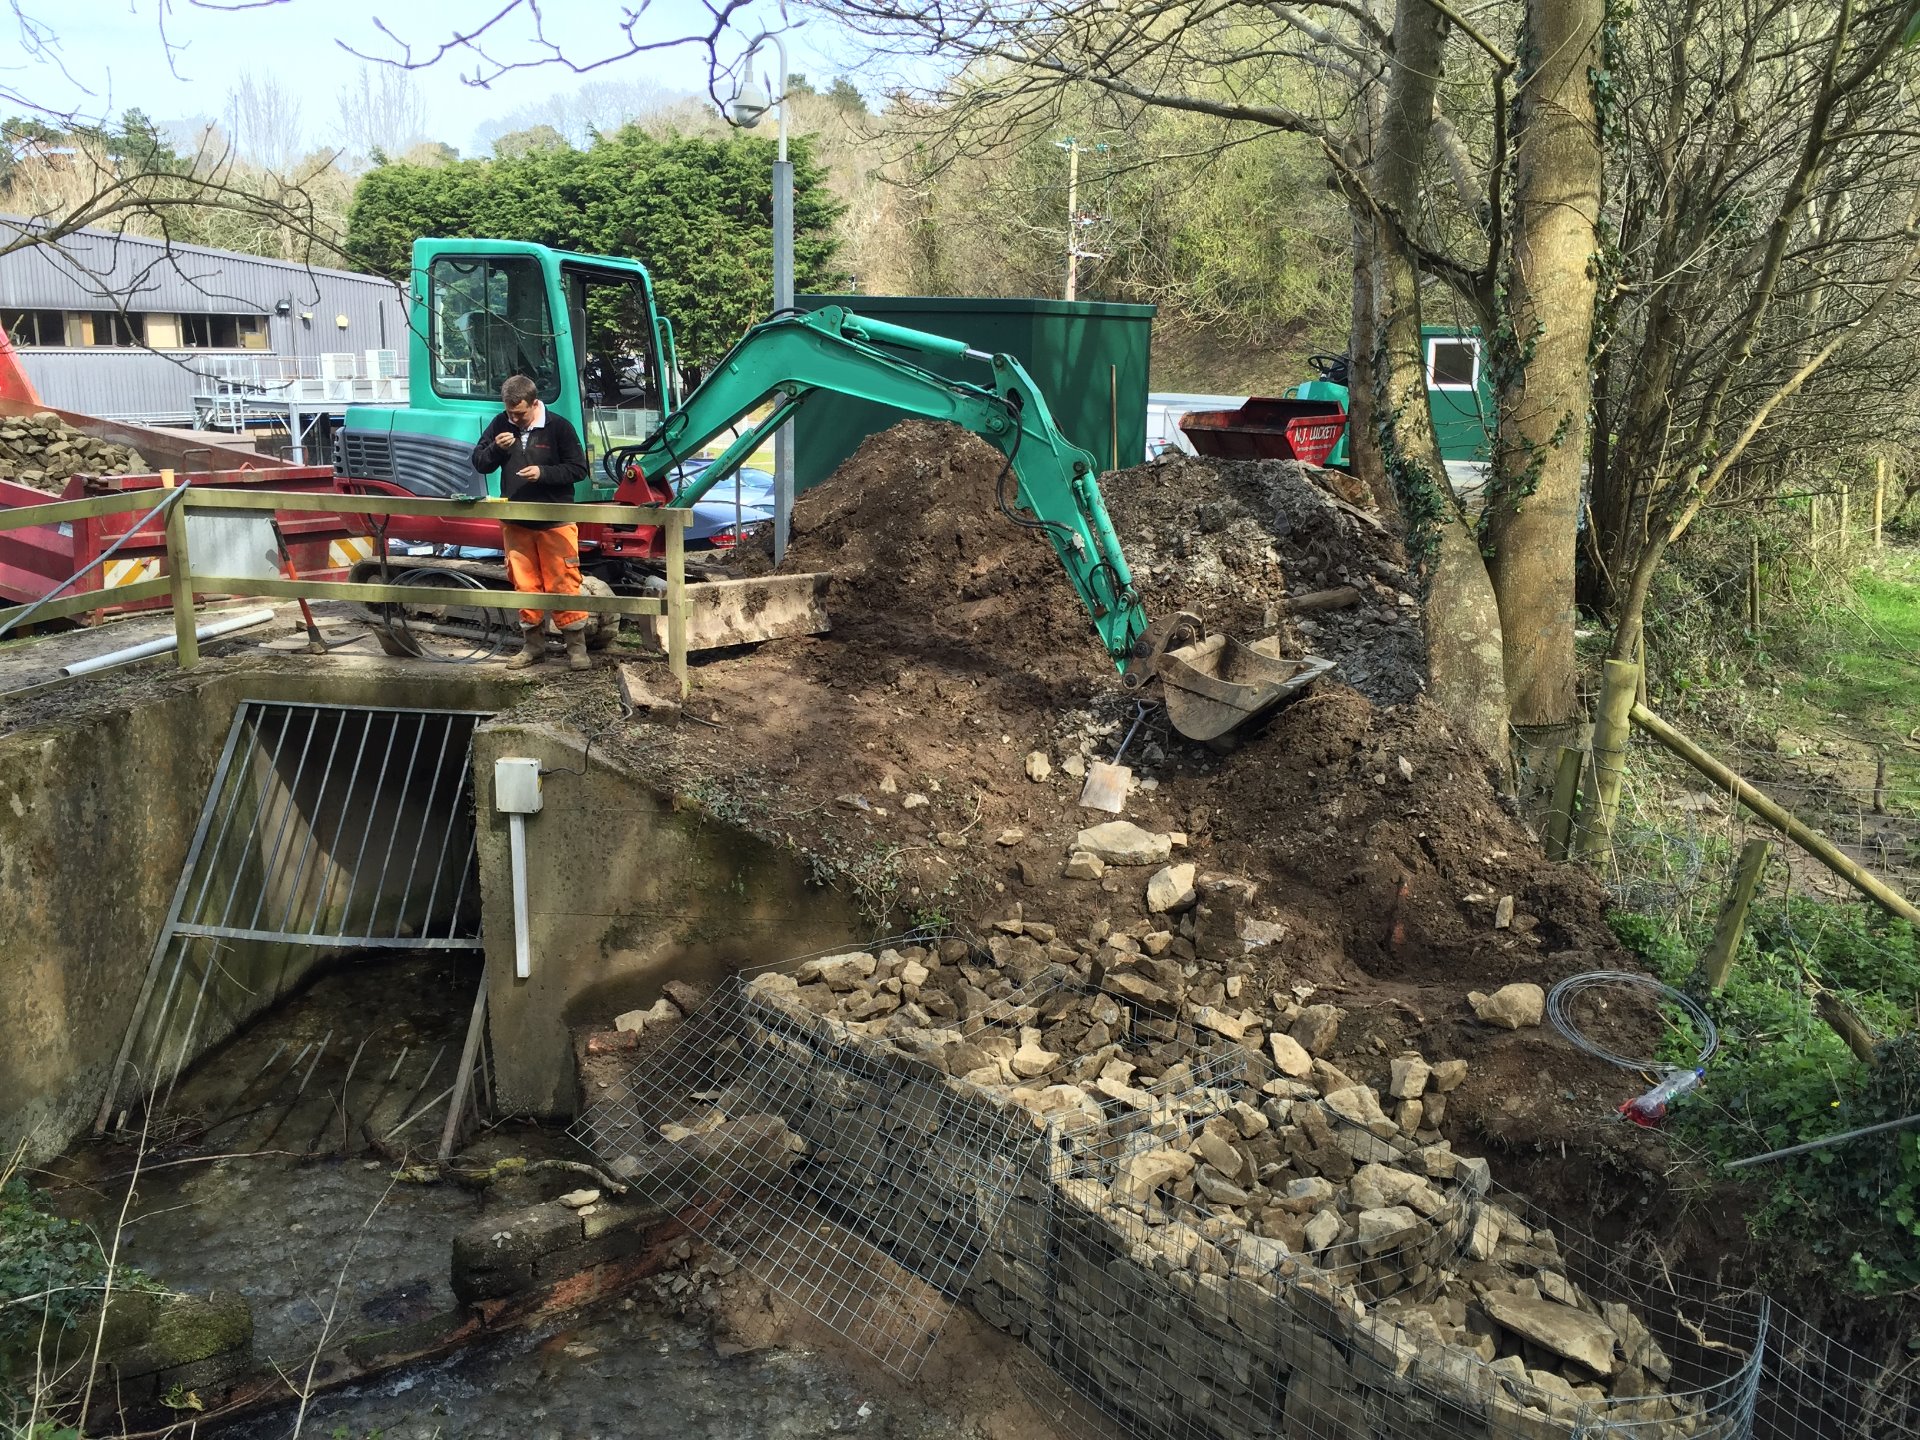 MJS Building Maintenance Ltd. project managing water diversion works, working with the local environmental agency